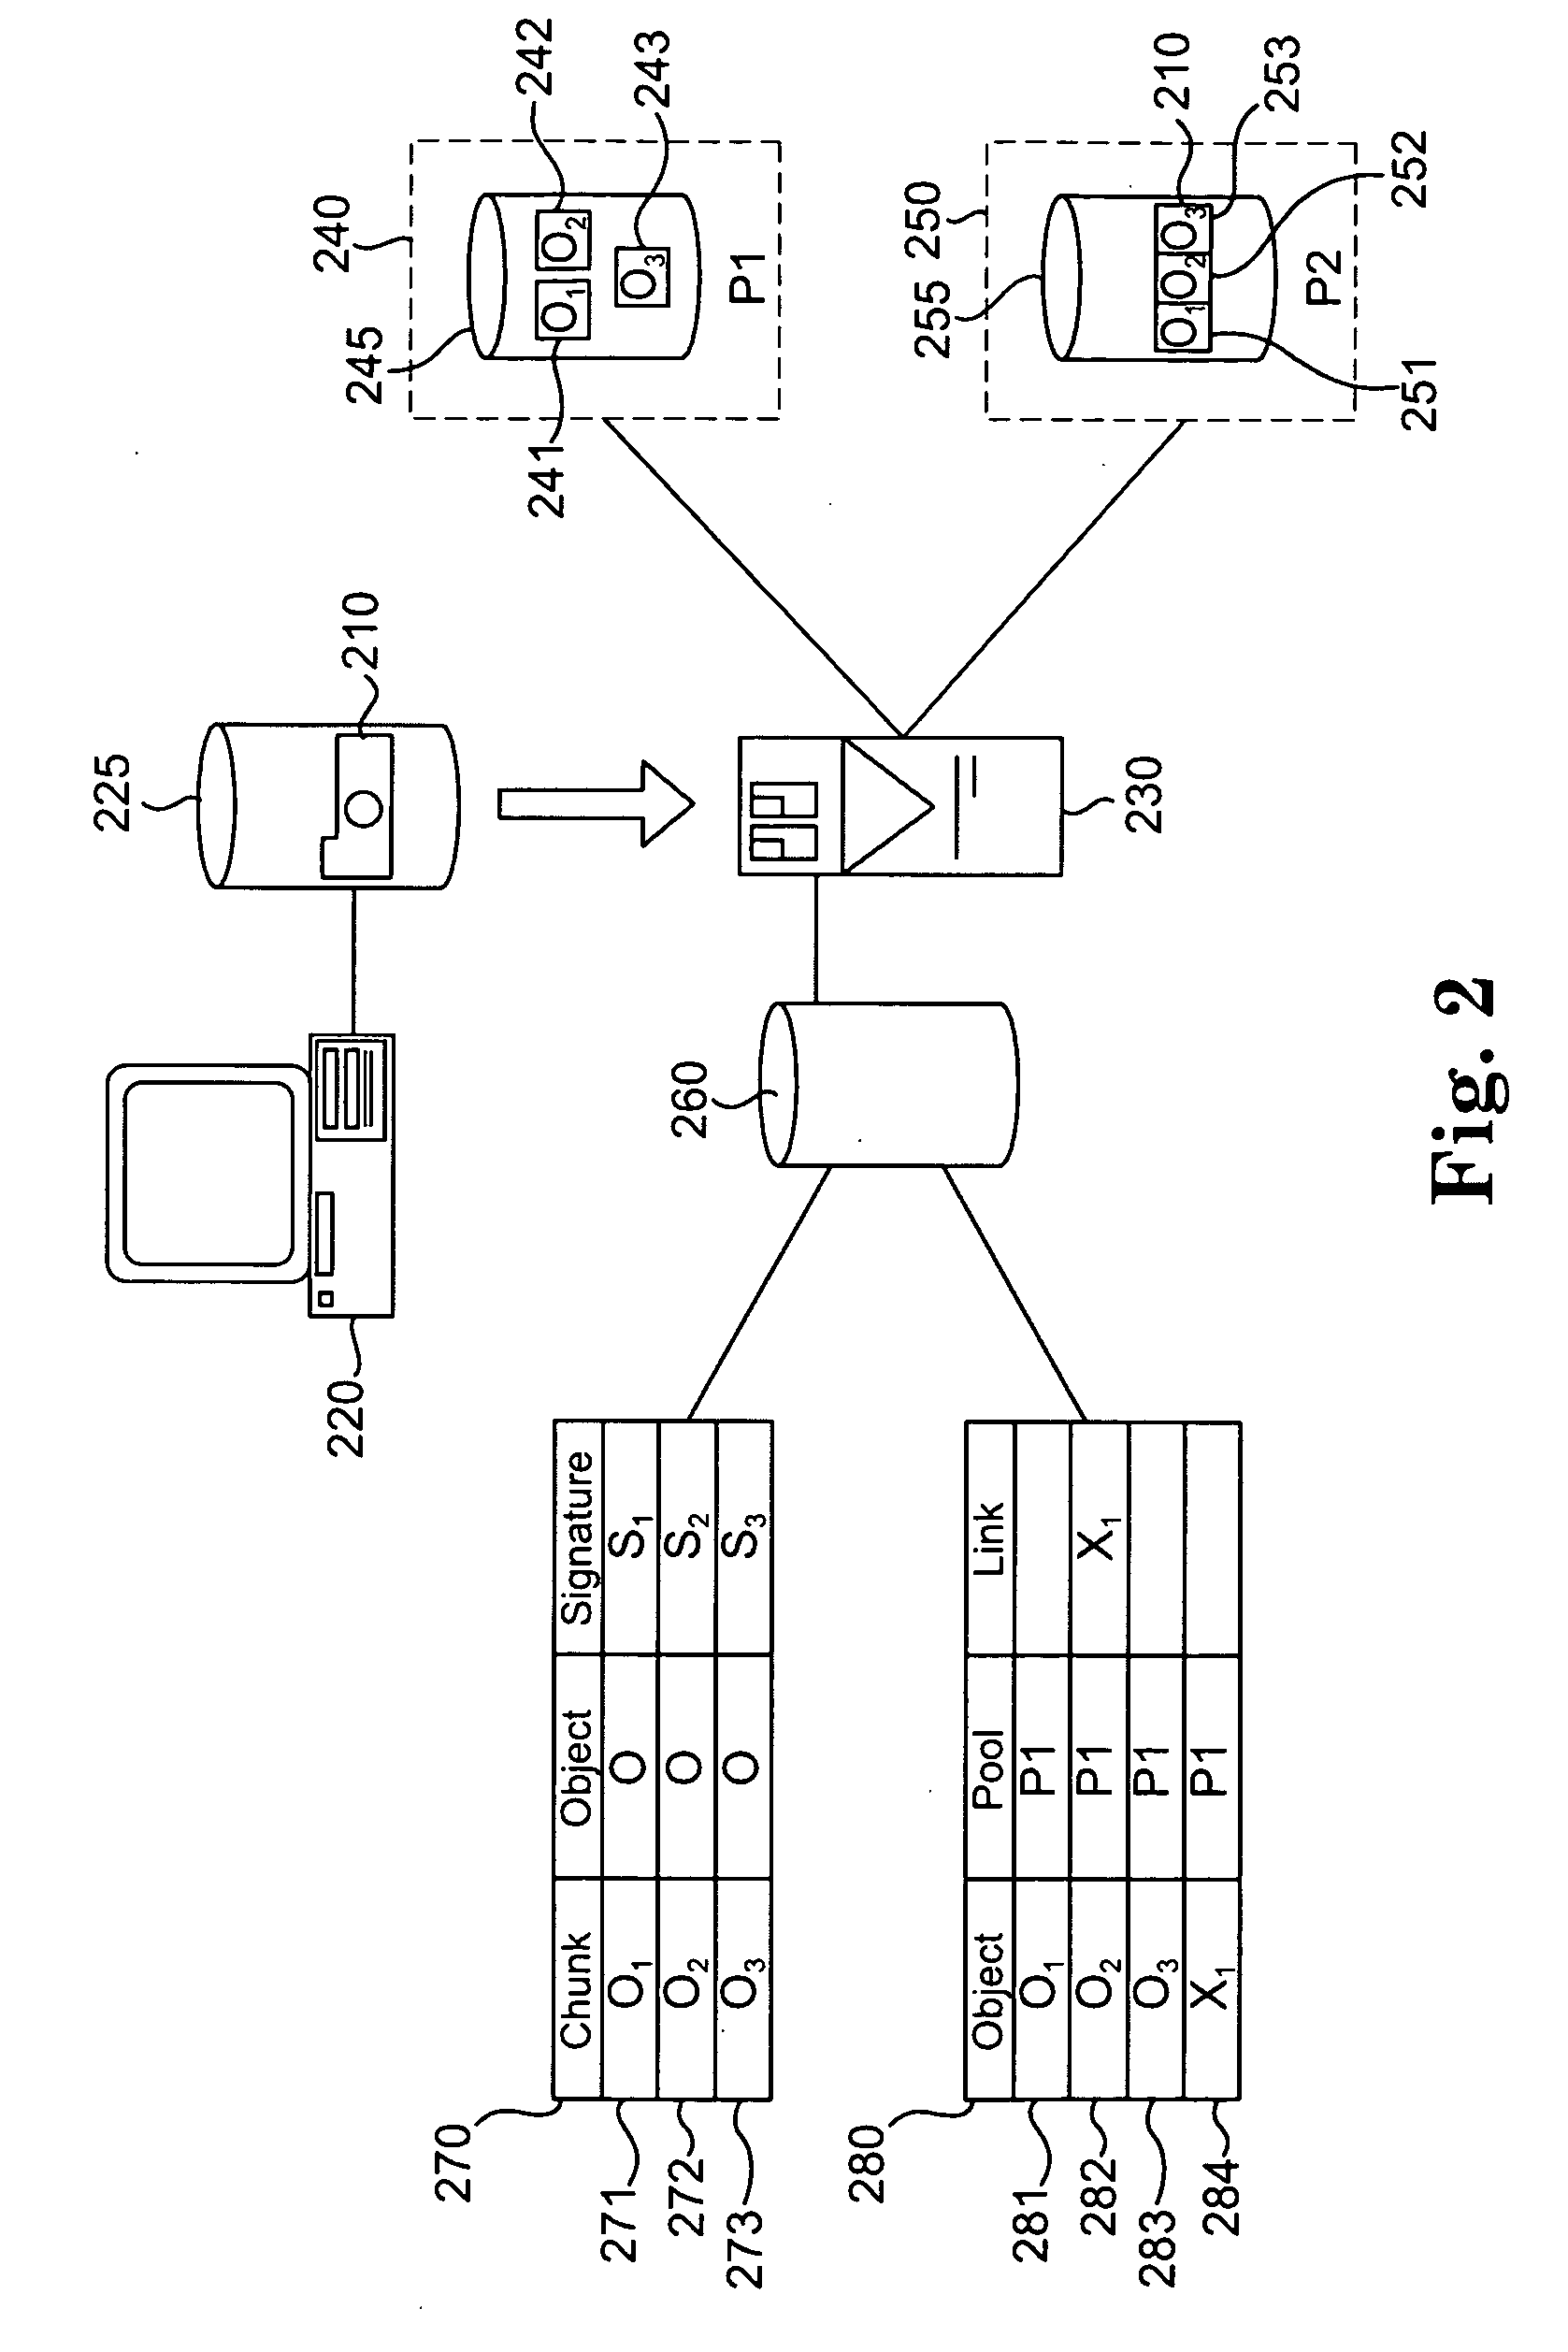 Policy-based sharing of redundant data across storage pools in a deduplicating system